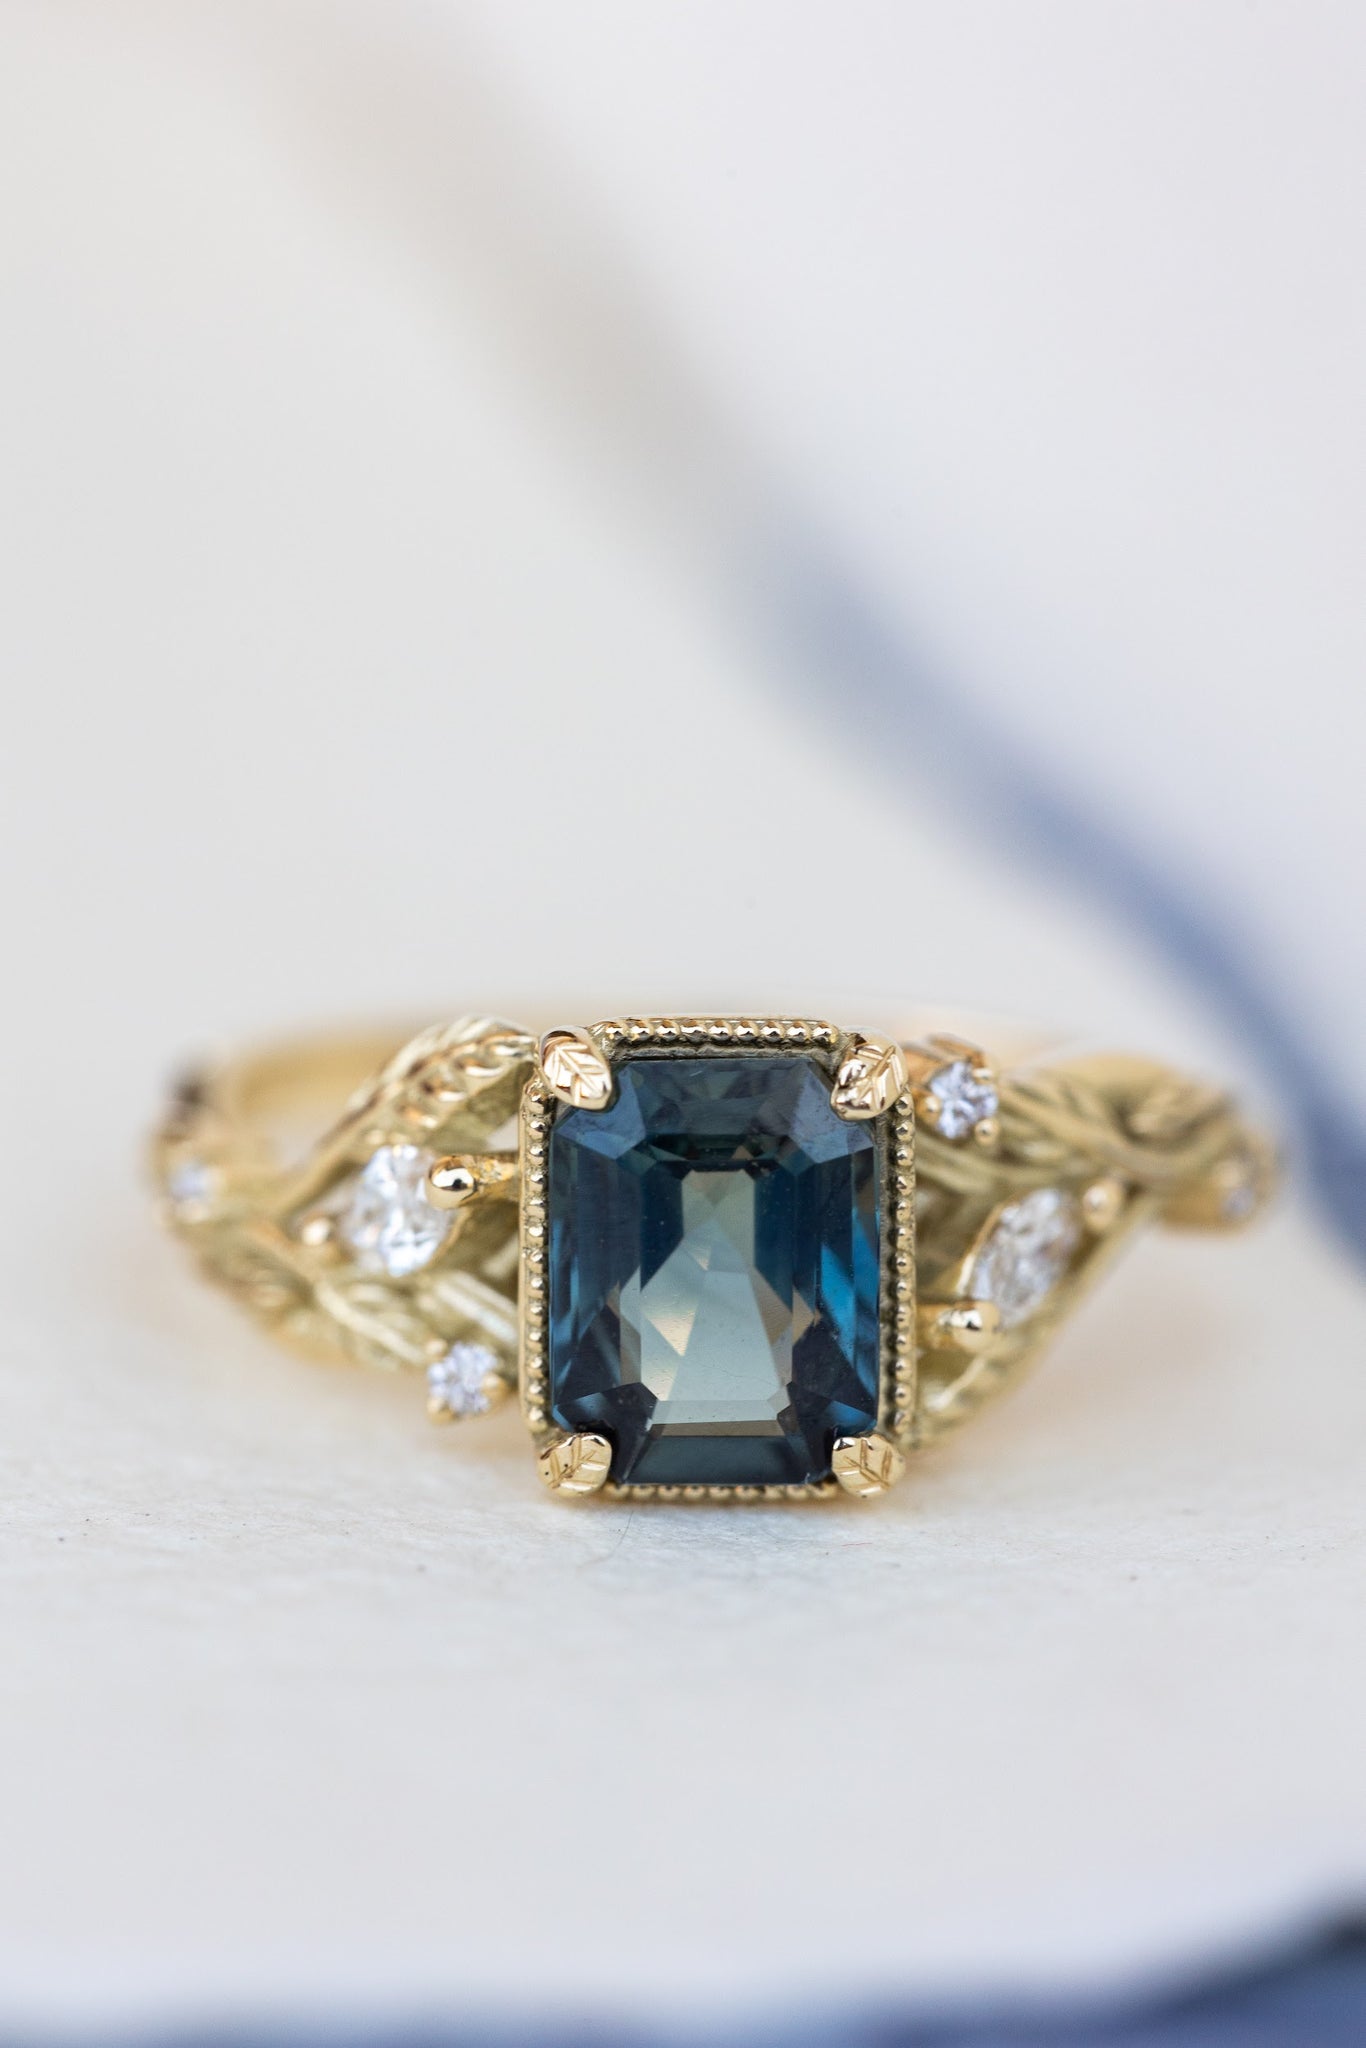 READY TO SHIP: Patricia ring in 14K yellow gold, natural teal sapphire emerald cut 8x6 mm, accents natural diamonds, AVAILABLE RING SIZES: 6-8US - Eden Garden Jewelry™